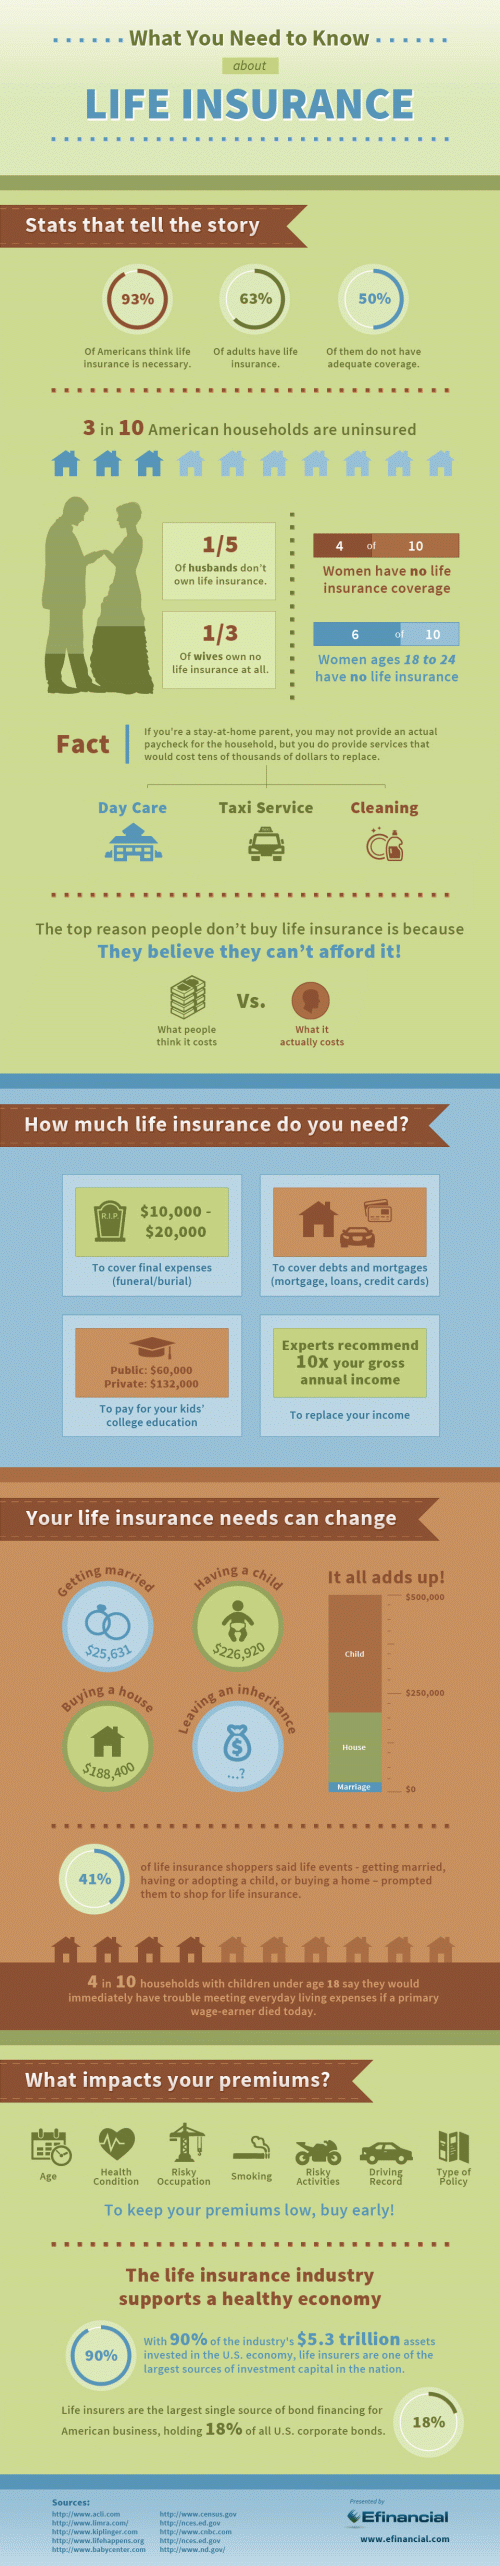 The Facts on Life Insurance | Daily Infographic